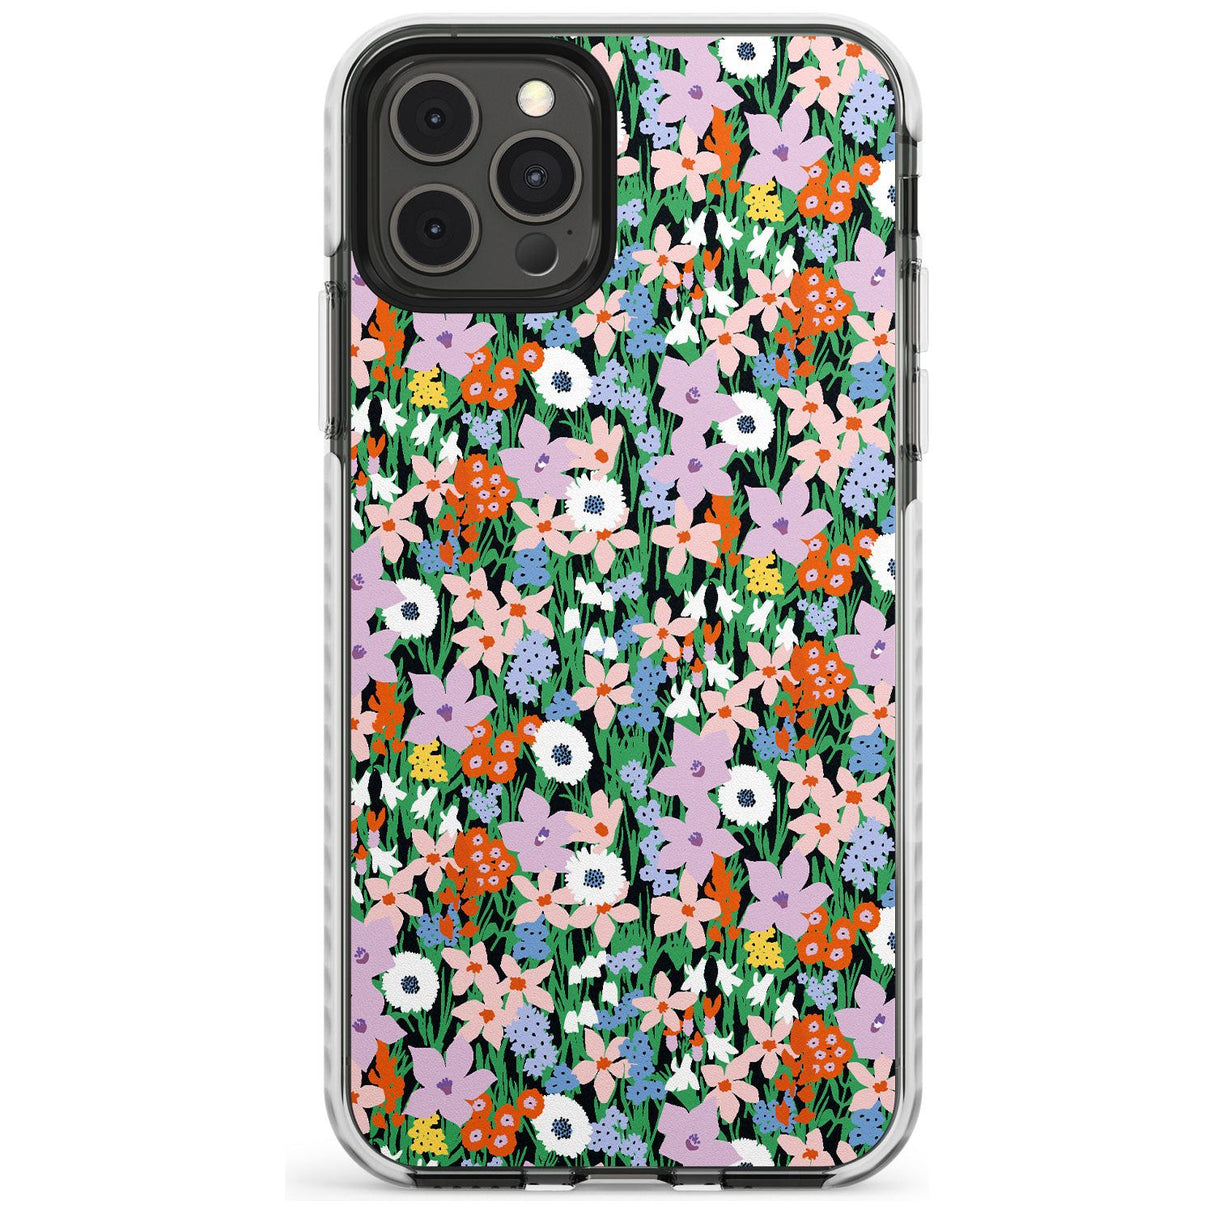 Jazzy Floral Mix: Solid Slim TPU Phone Case for iPhone 11 Pro Max